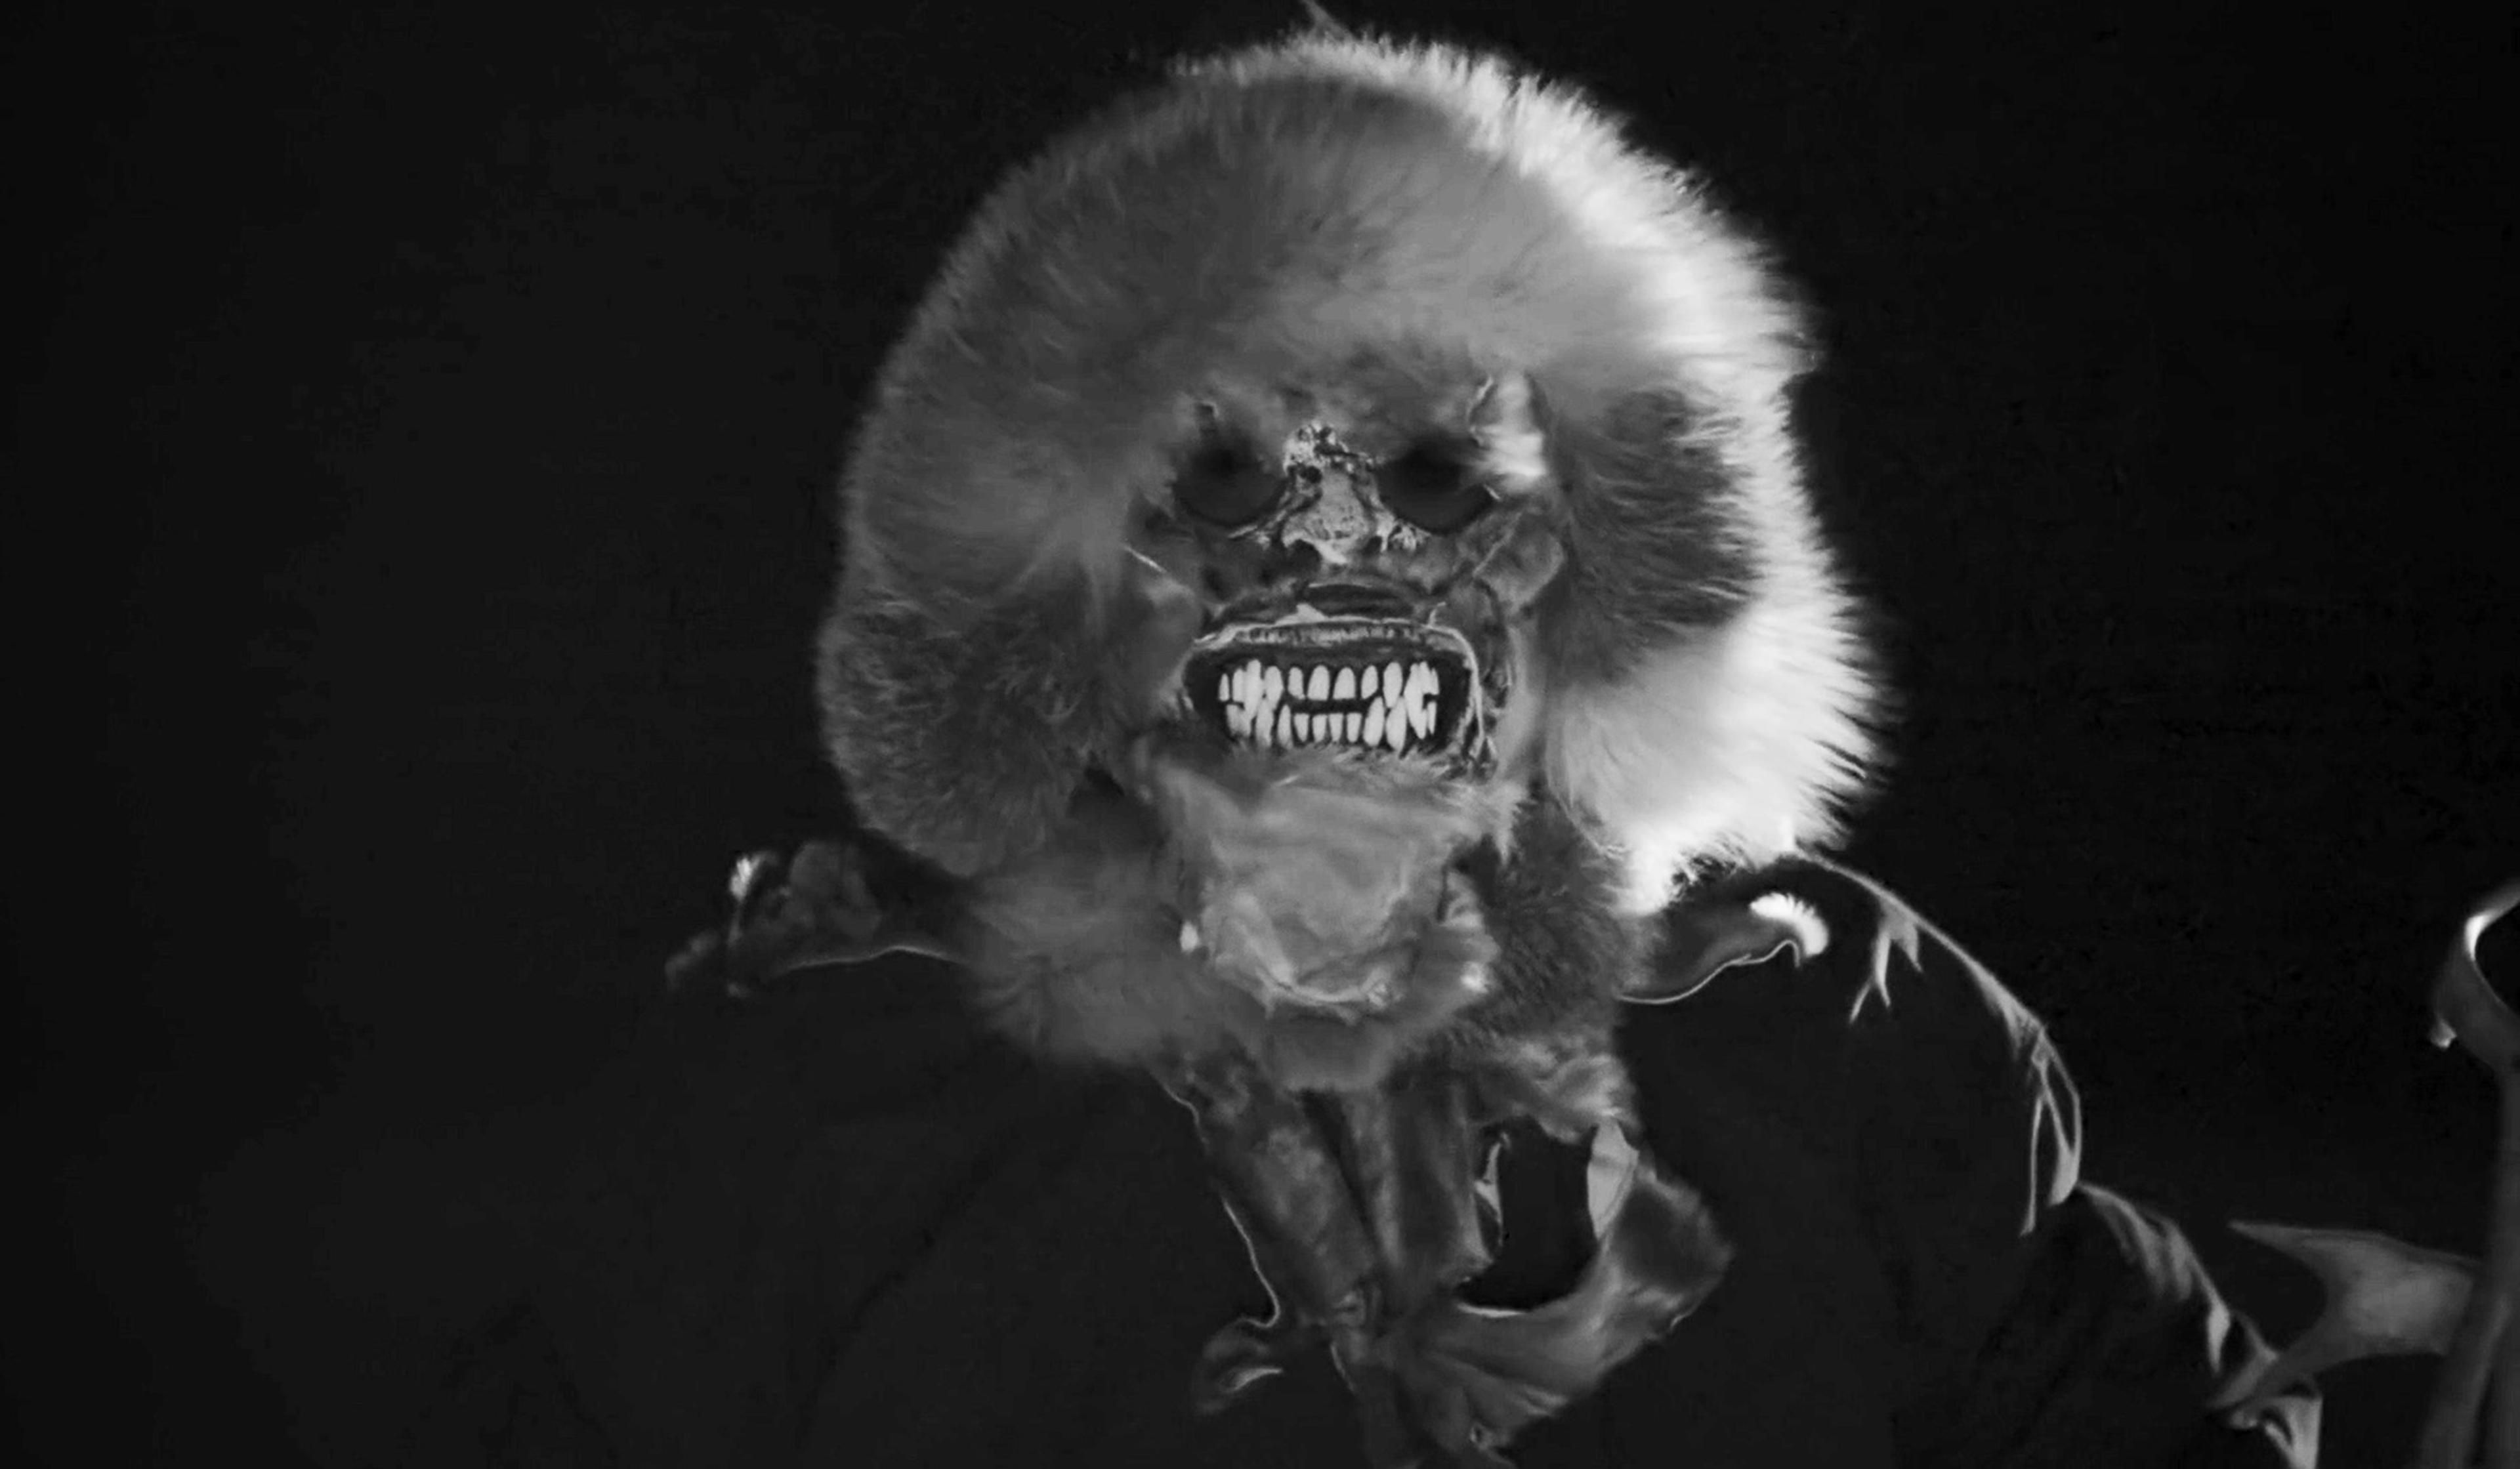 A scary figure in a fur-lined hood with a skeletal face and sharp teeth, in black and white against a dark background.